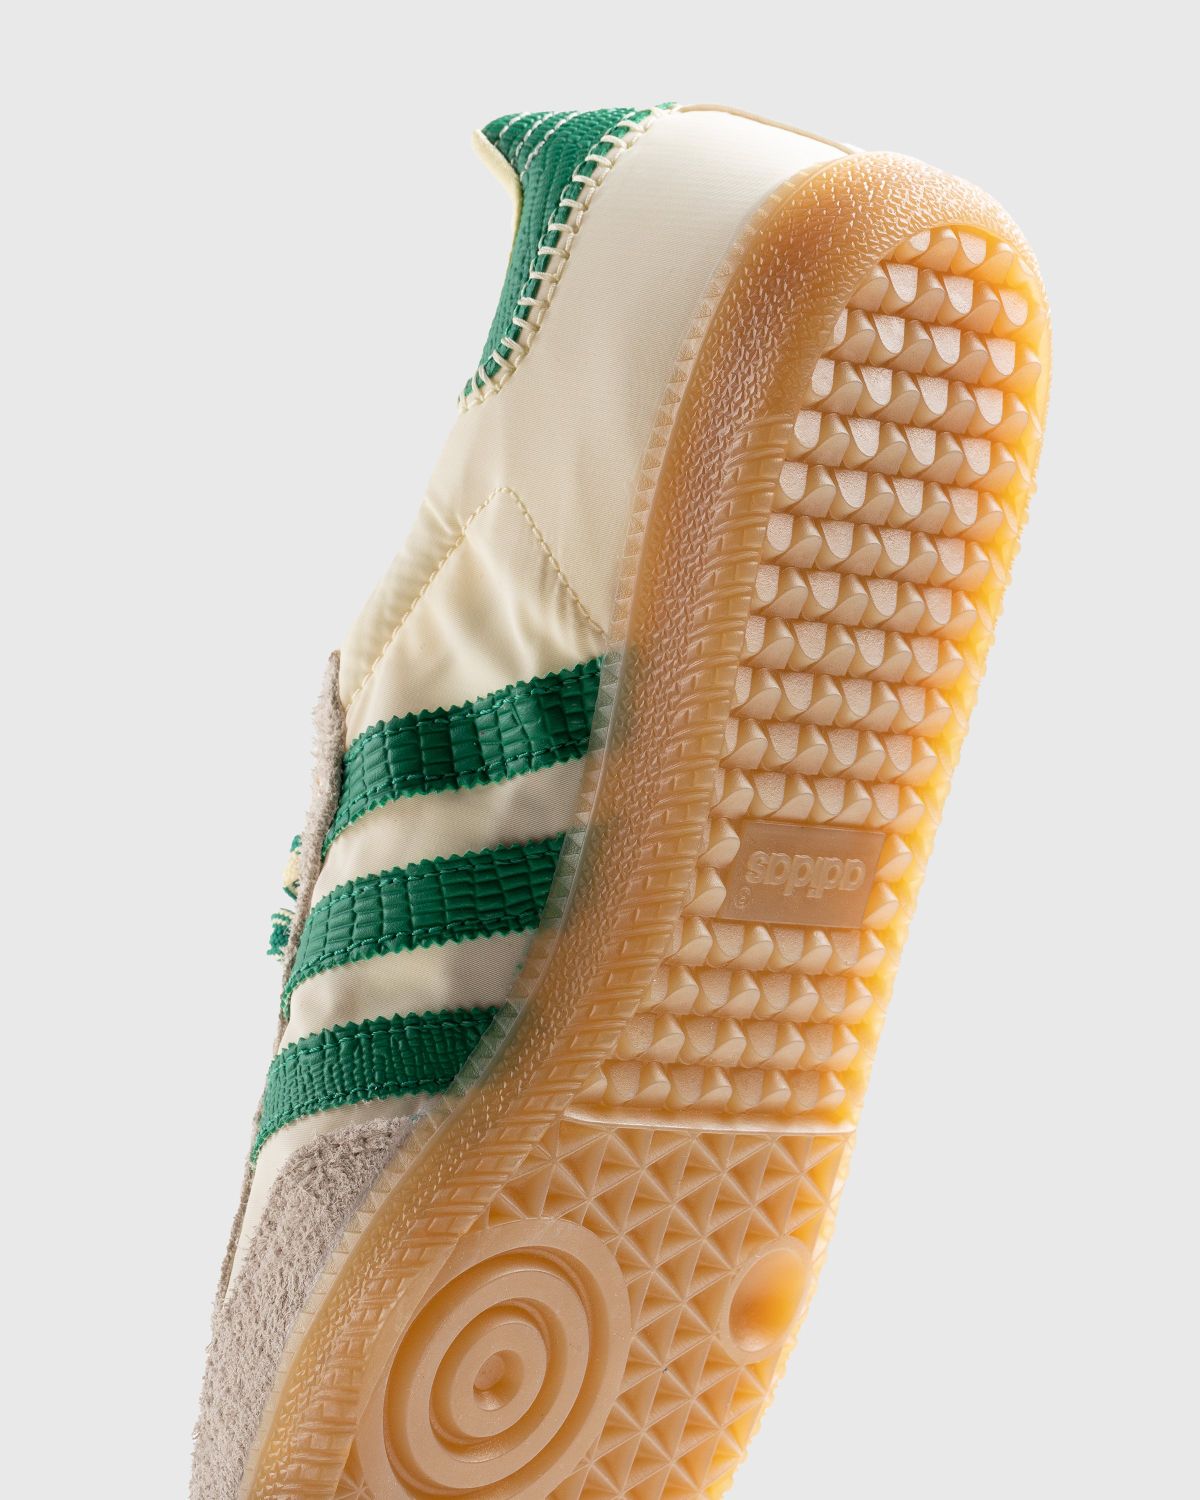 Adidas x Wales Bonner – WB Samba Cream White/Bold Green/Easy Yellow - Low Top Sneakers - Beige - Image 6